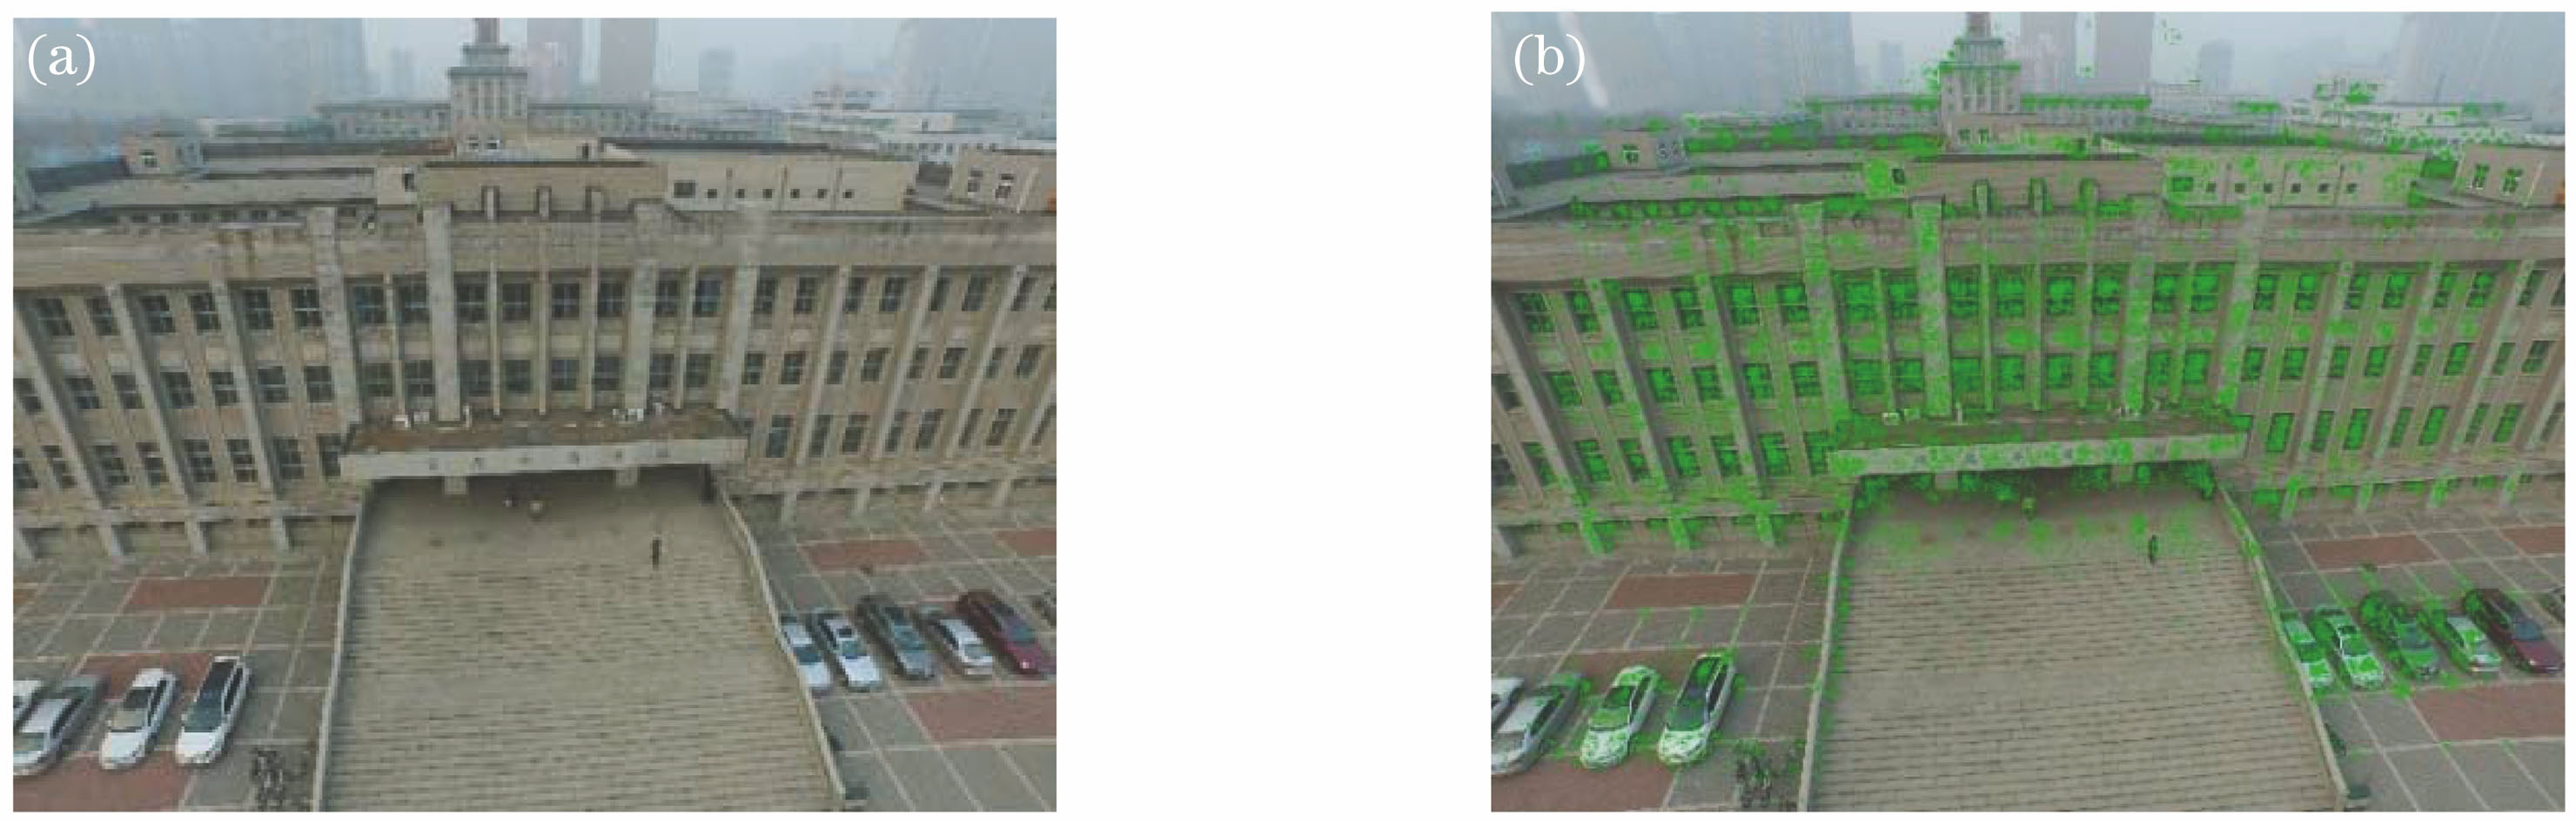 ASIFT feature extraction of aerial image. (a) Original image; (b) ASIFT features